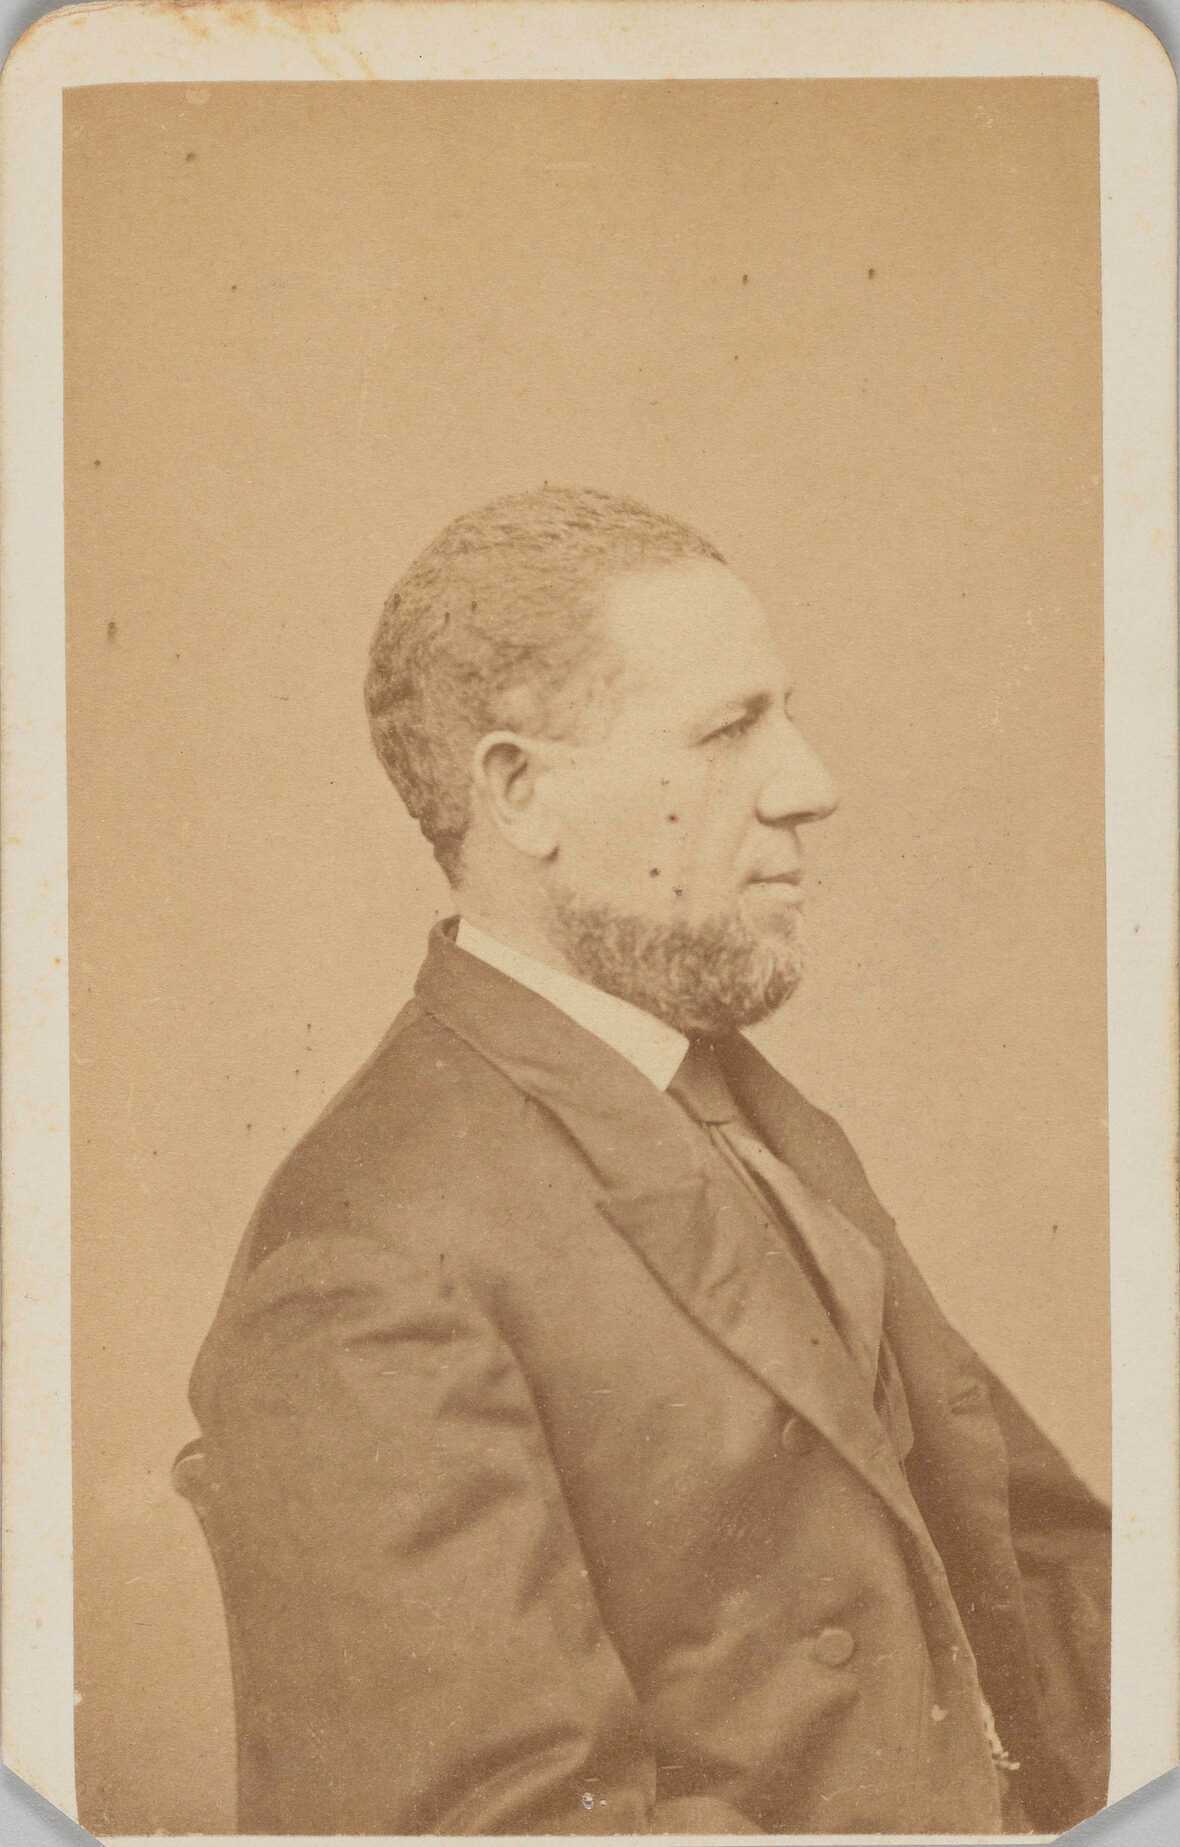 An albumen carte-de-visite portrait of United States Senator Hiram Revels. A dark haired man, Hiram Revels, is seated in a profile position with his proper right side facing the camera. He wears a tall bright collar, dark tie, and dark single breast jacket with two buttons on the torso. The photograph is on original plain mount; the mount is cropped to image along bottom edge. On the back of the photograph, written in pencil, from top to bottom, is: [Hiram Revels / 1st African-American / Senator / Mississippi 1870 / Revells].